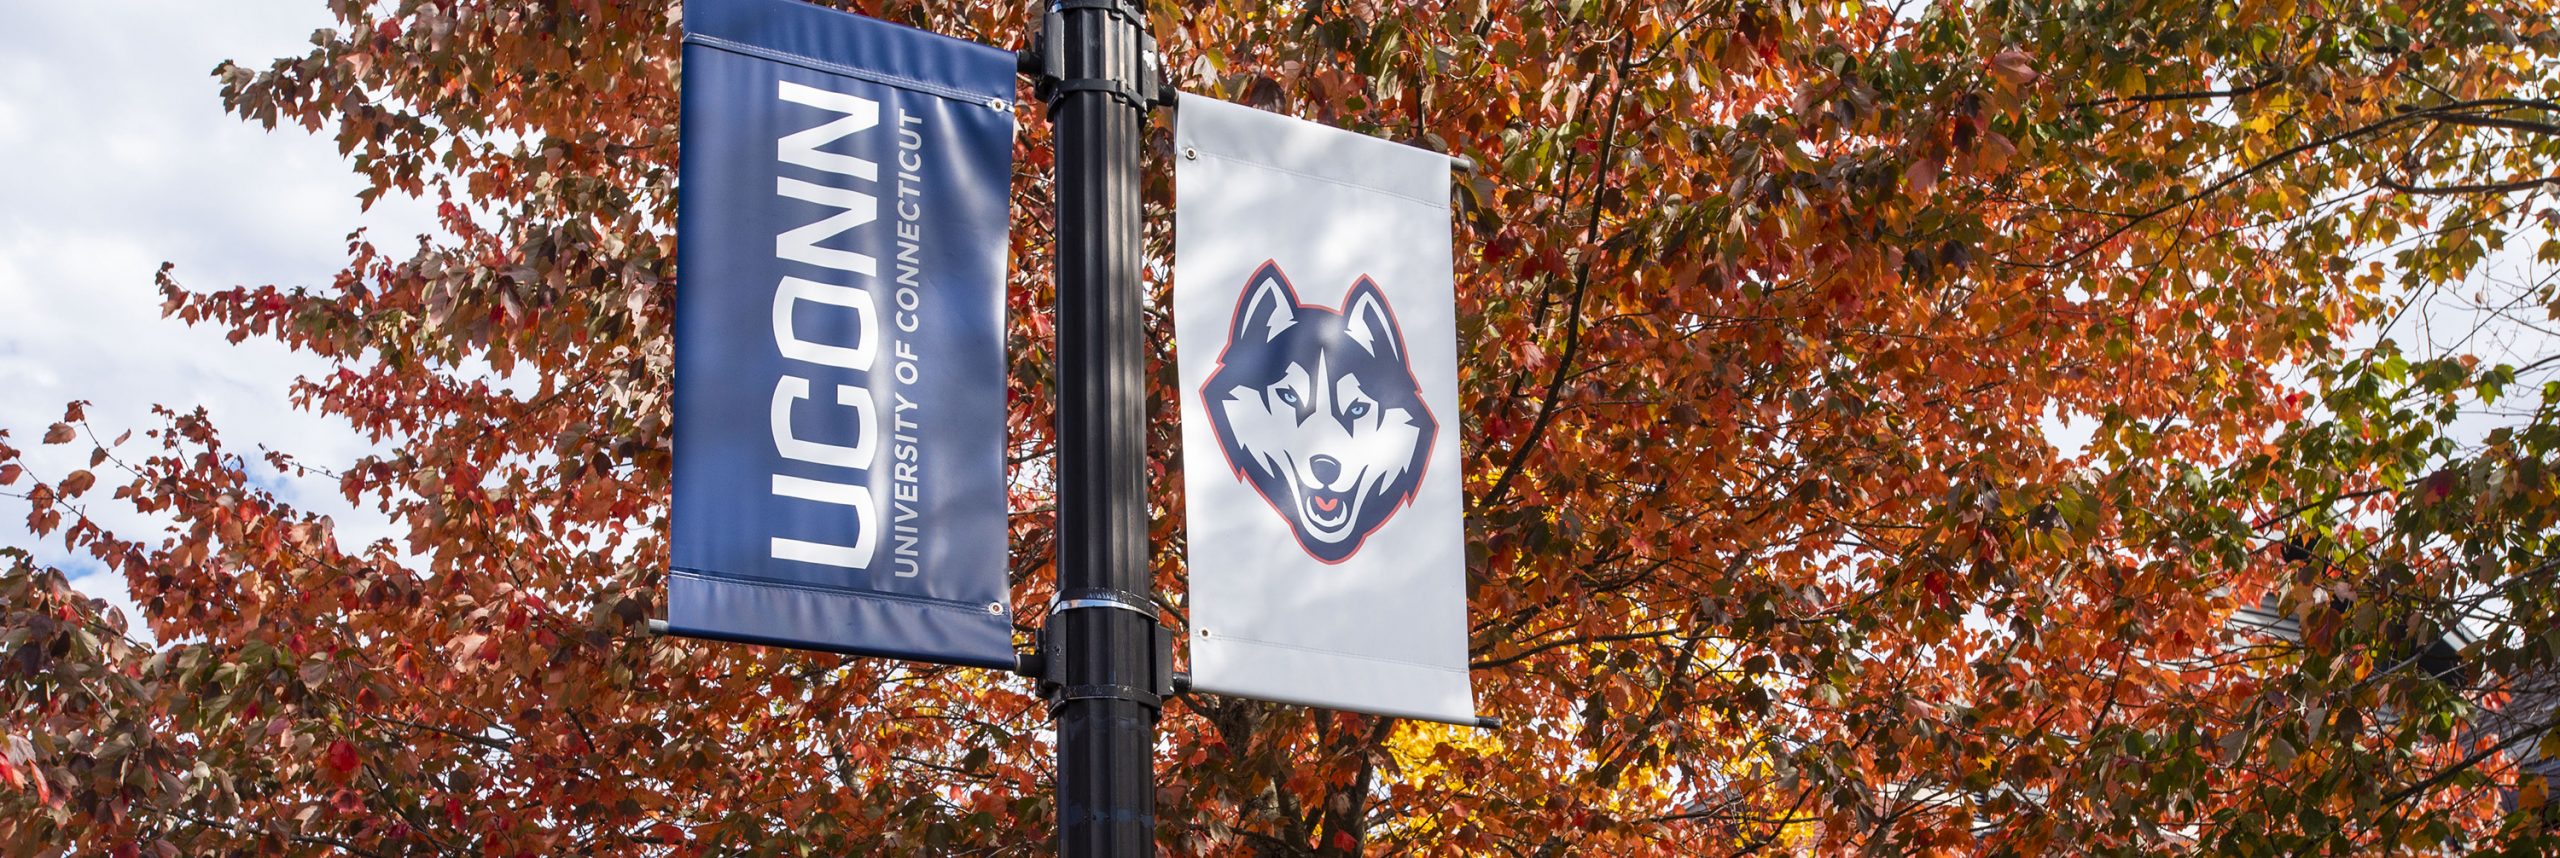 Lamppost banners with the UConn and husky dog logos